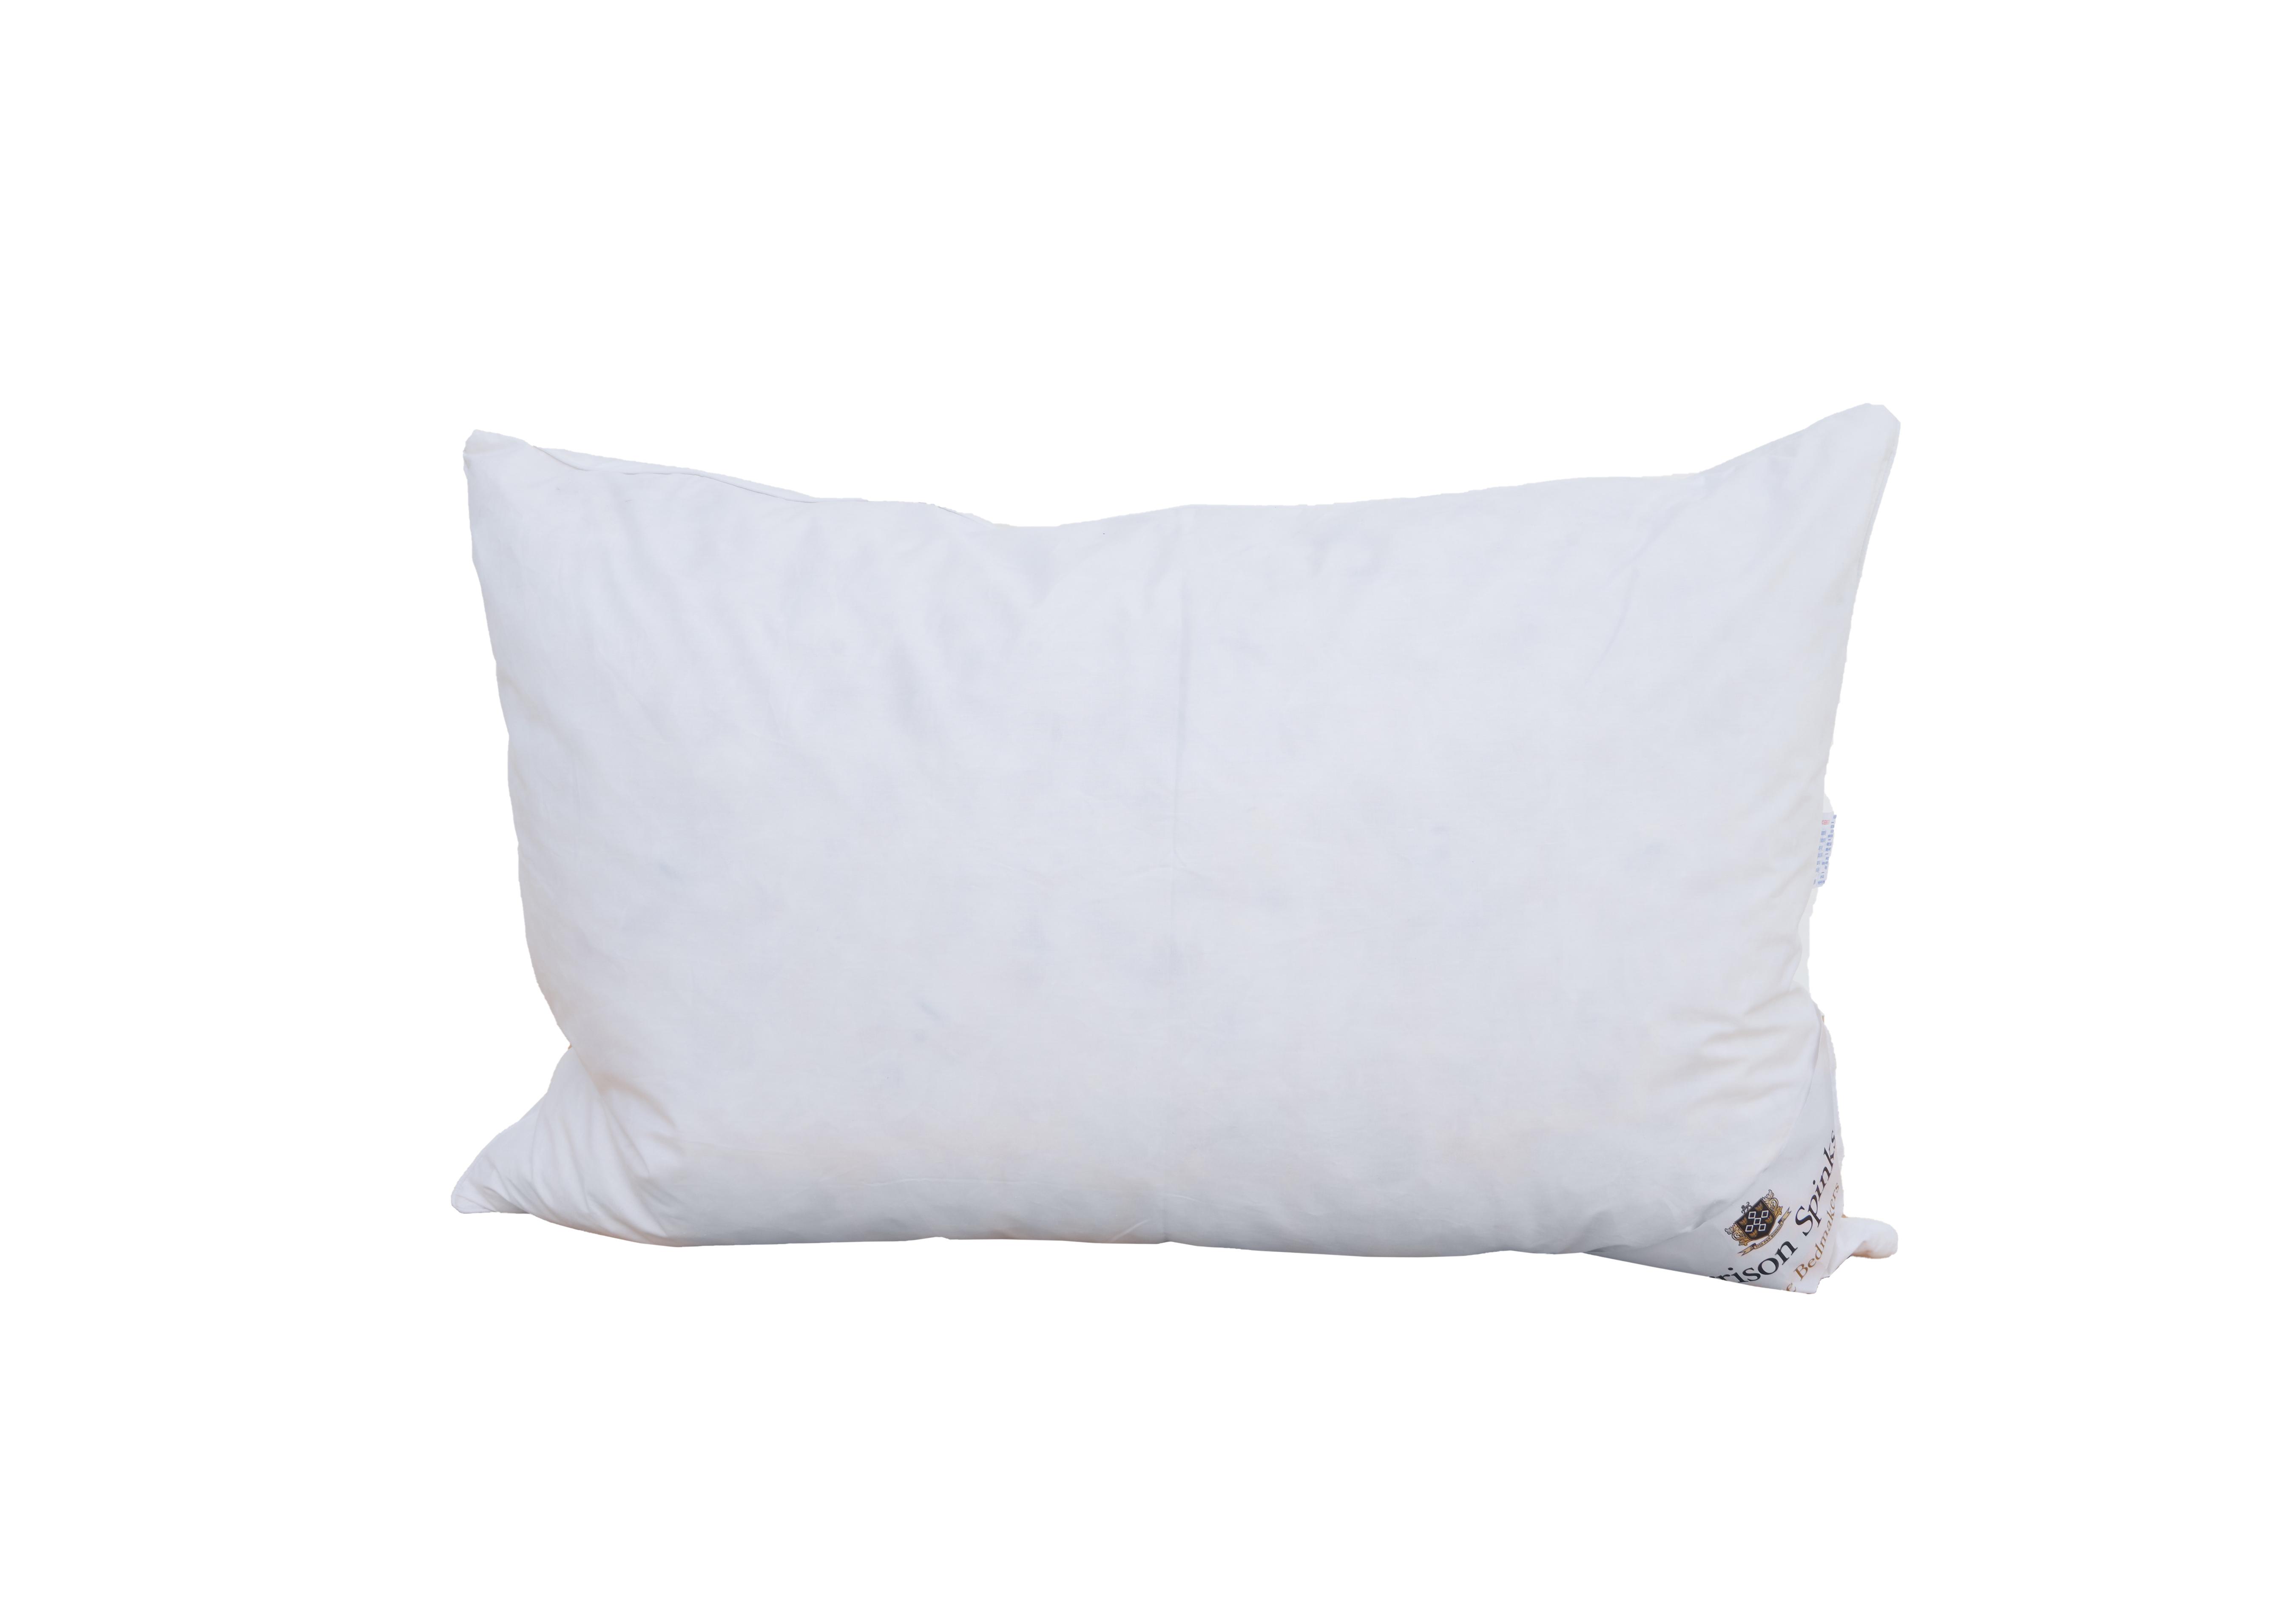 Yorkshire Luxury Goose Feather and Down Pillow in  on Furniture Village